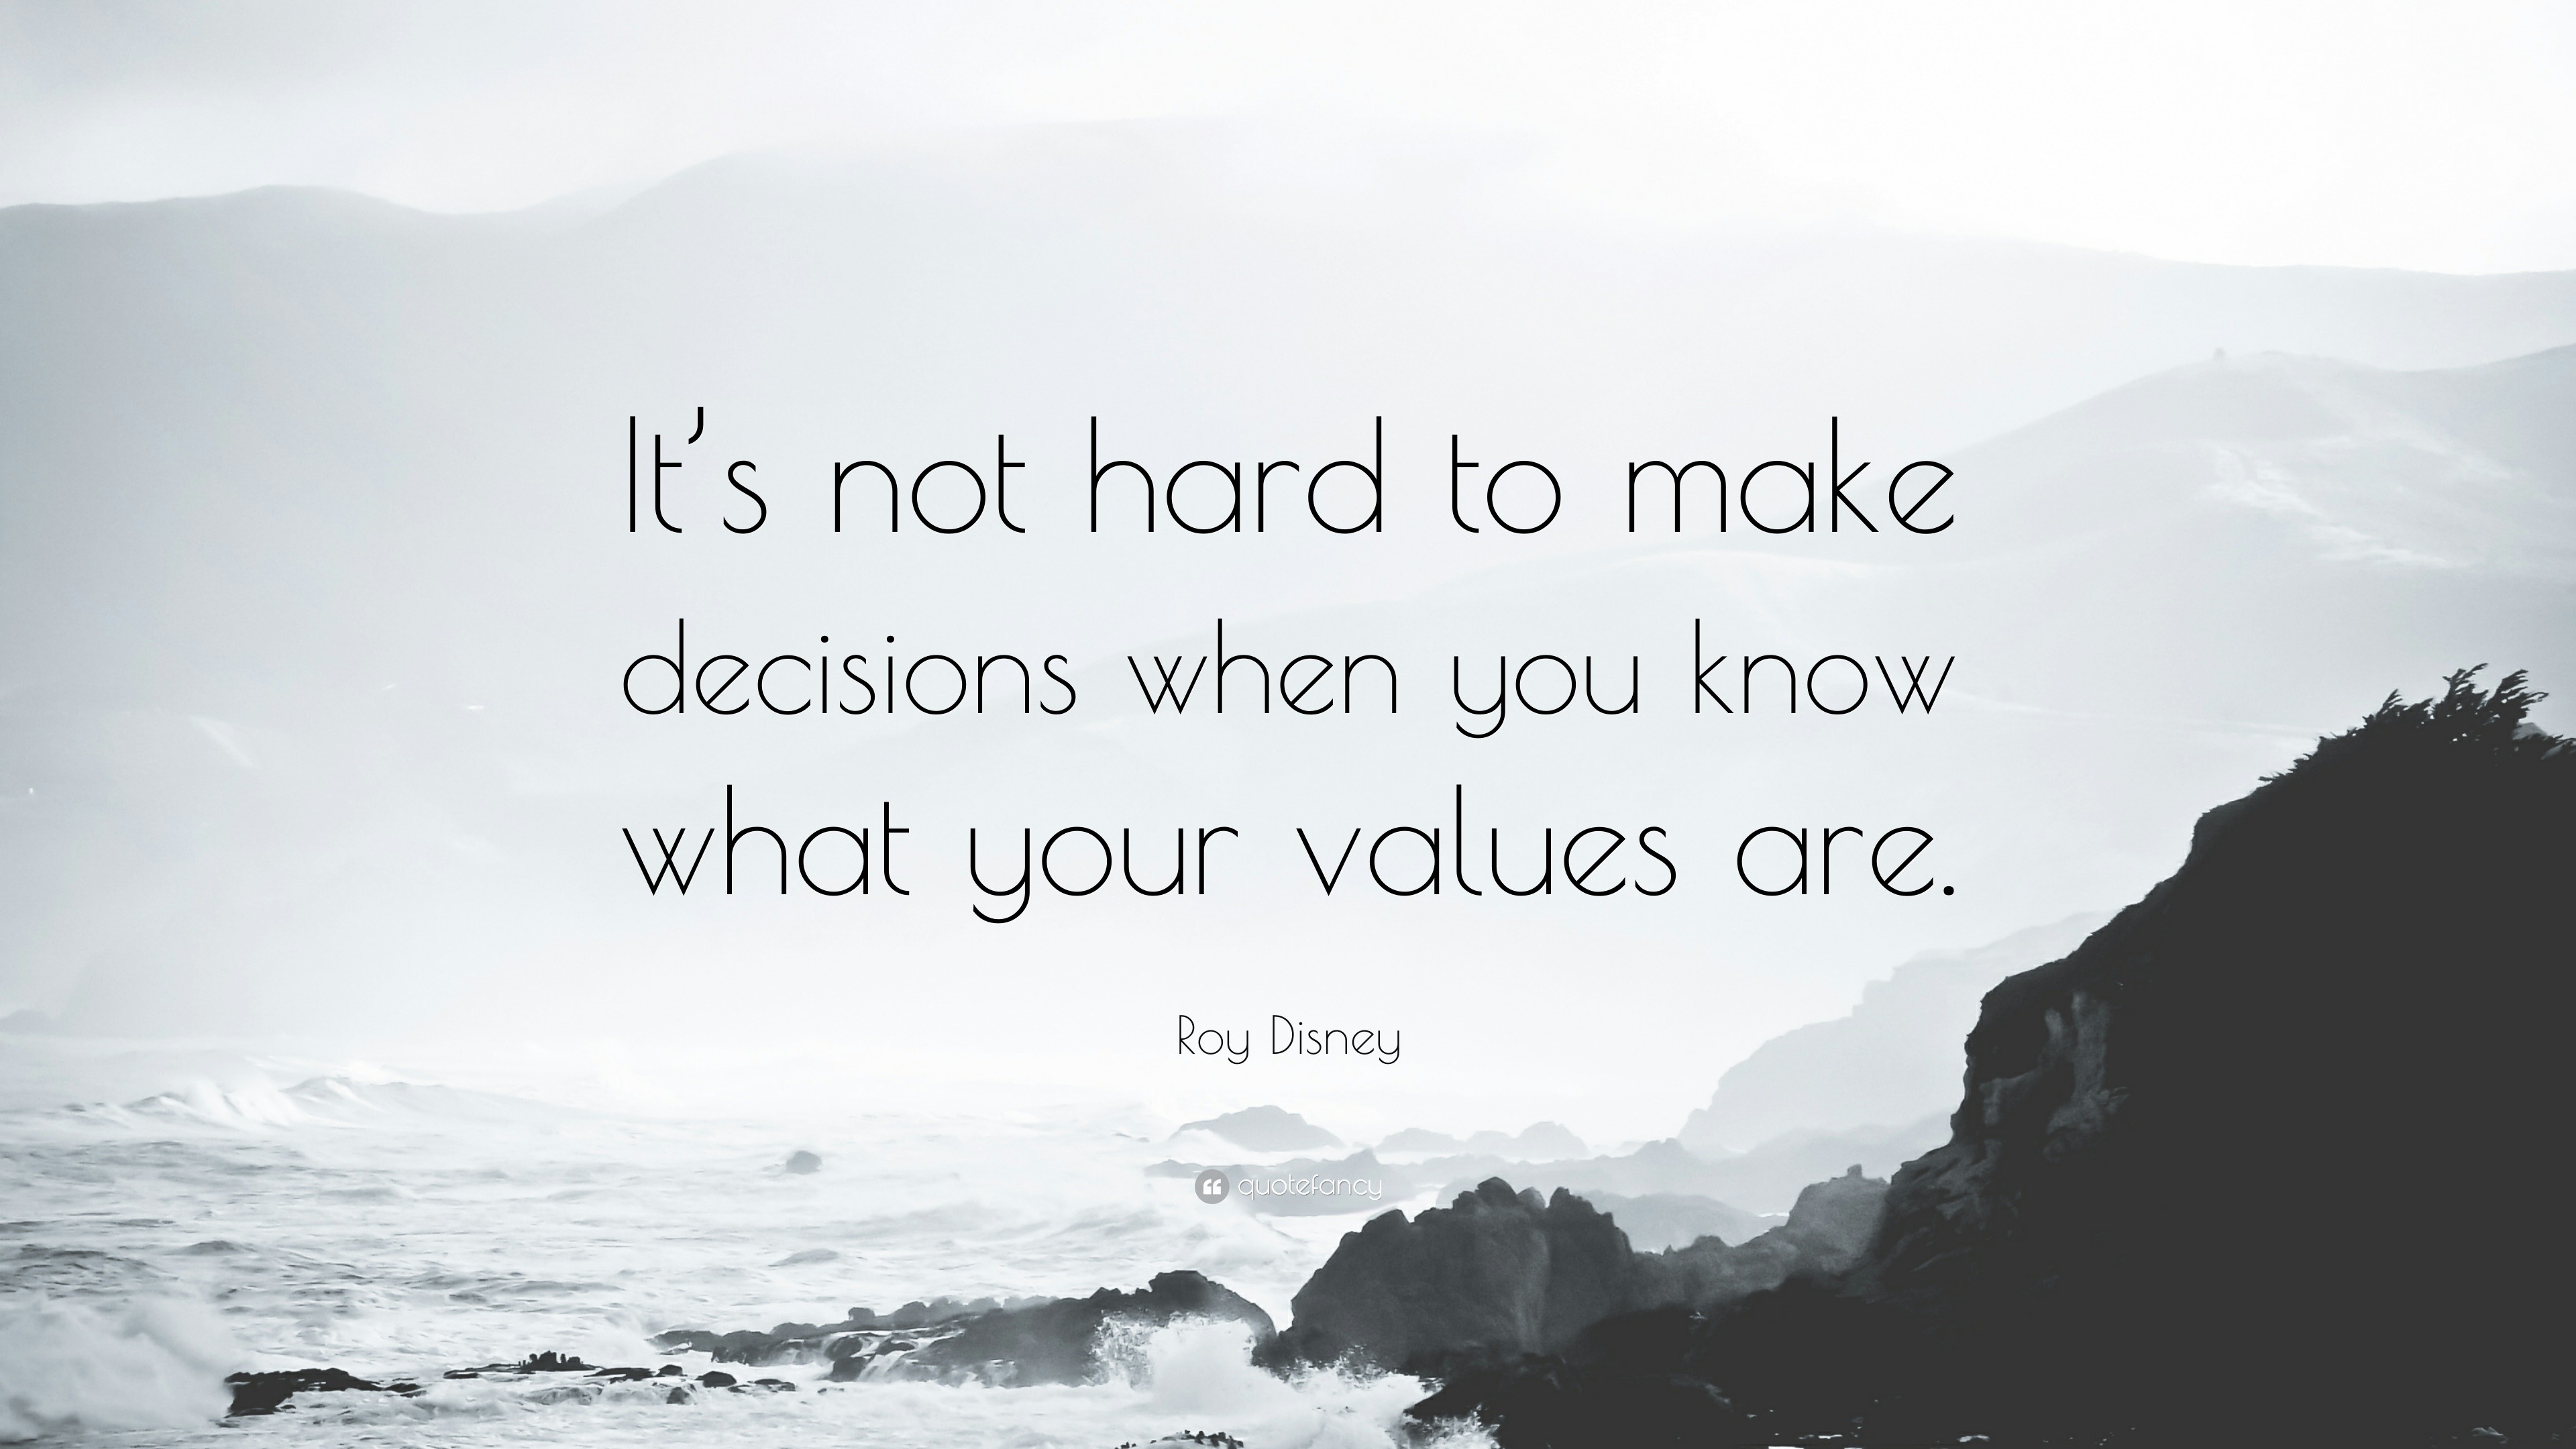 Roy Disney Quote: “It’s not hard to make decisions when you know what